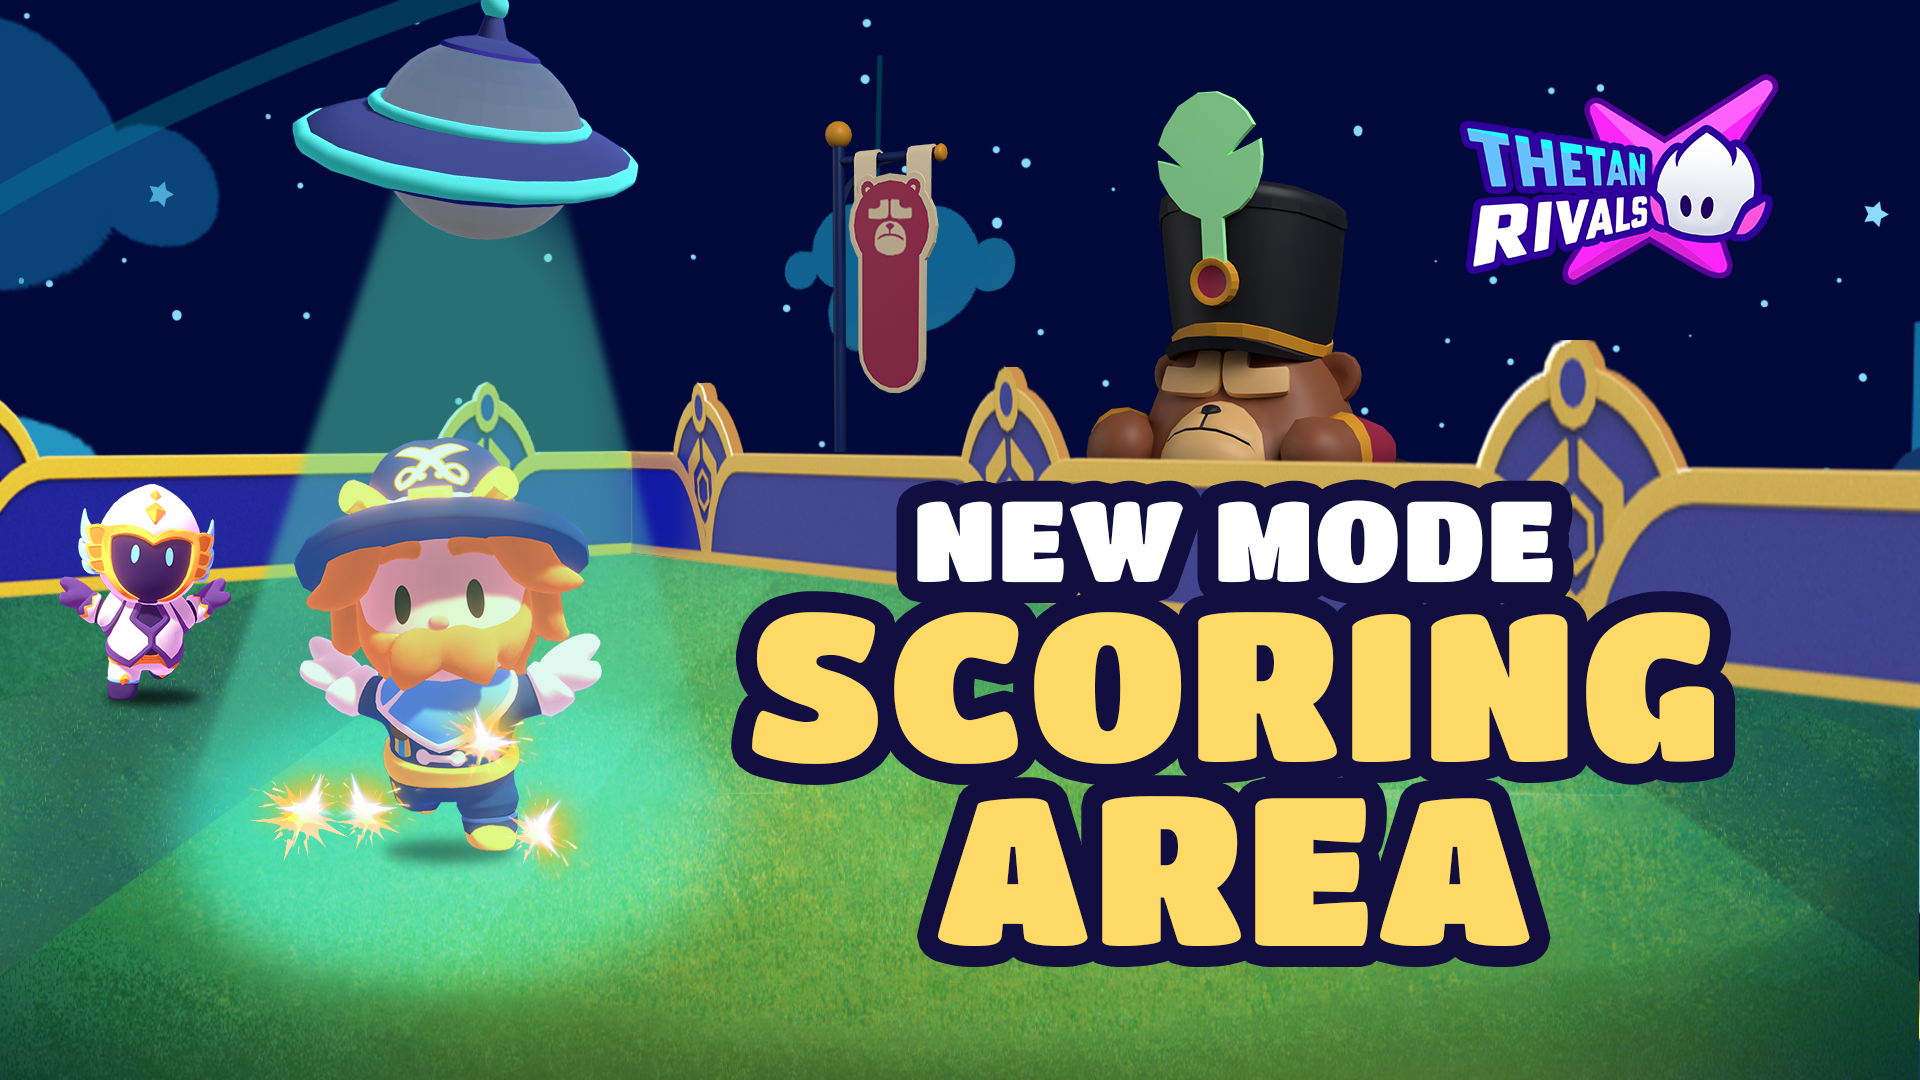 Don’t miss out on the new game mode - Scoring Area